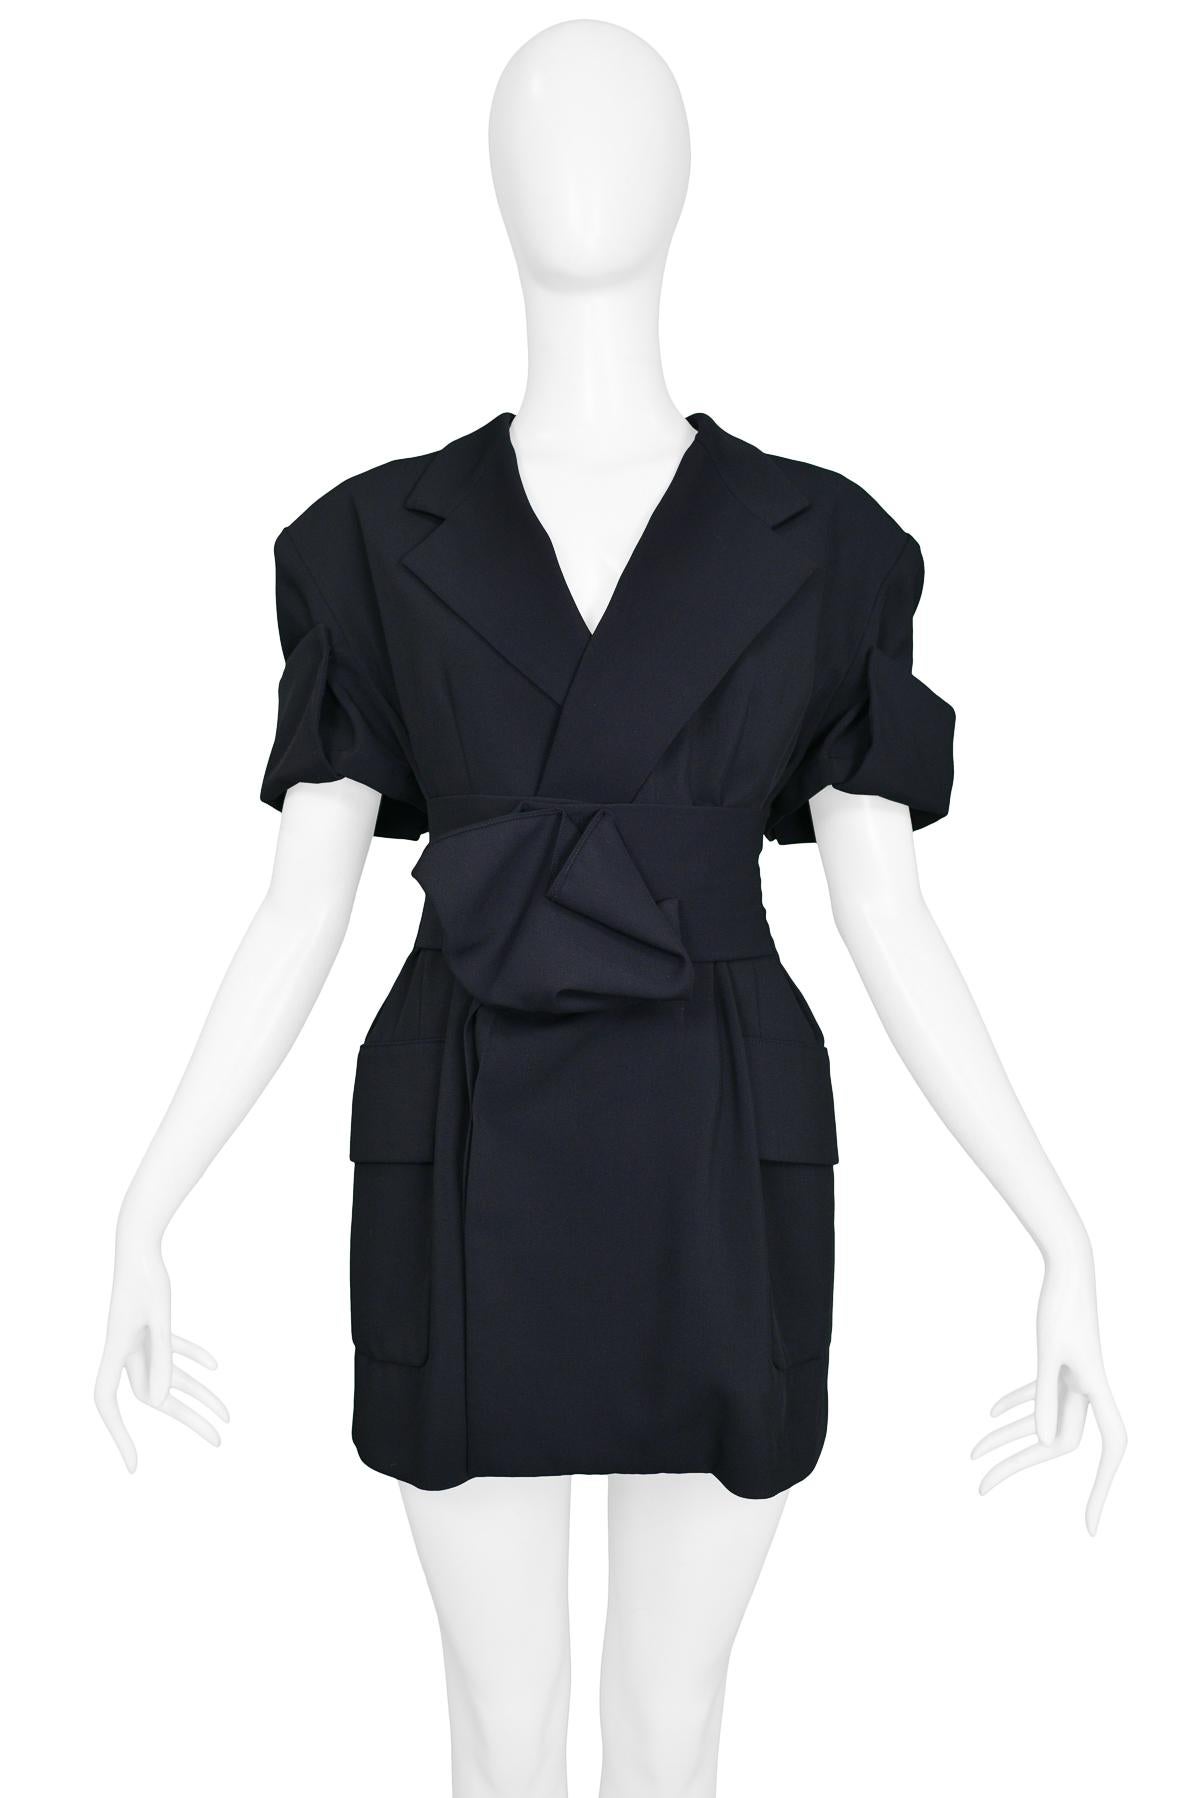 Vintage Yohji Yamamoto navy short sleeve blazer tunic featuring a wide lapel, side pockets, matching waist belt at front, and origami style pleating at the cuffs and belt center.

Excellent Condition.

Size: Small